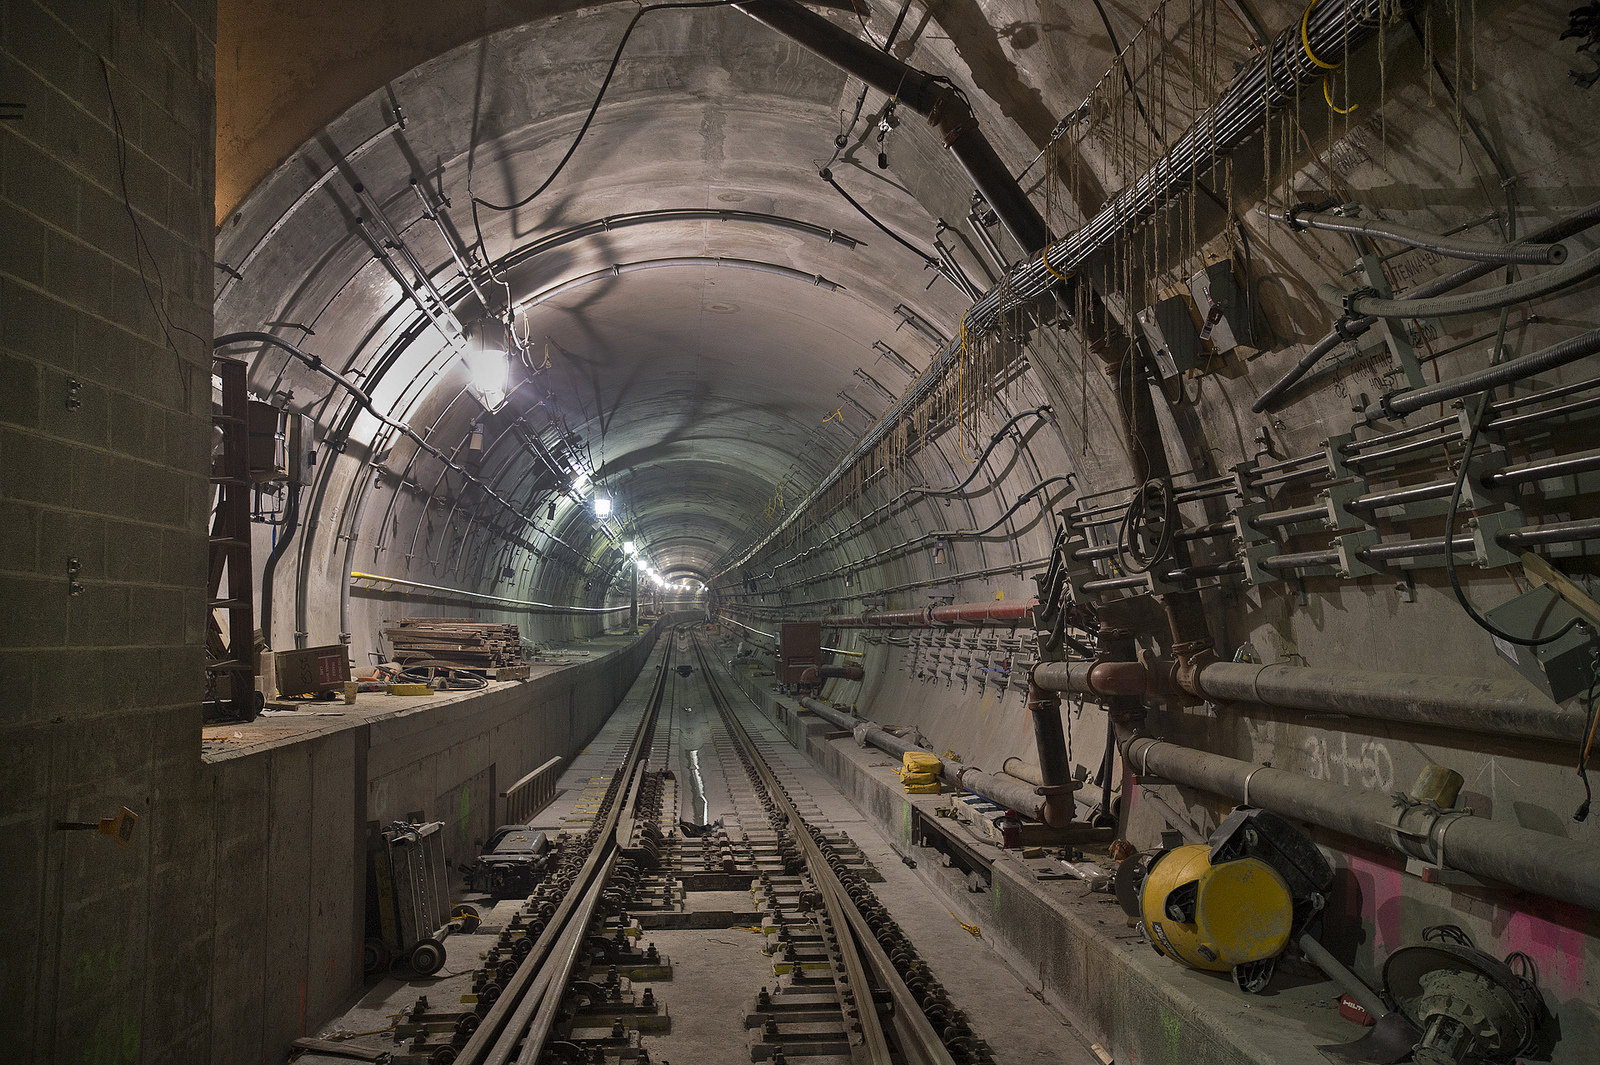 New York City’s New Subway Tunnel Looks Like A Level From Half-Life